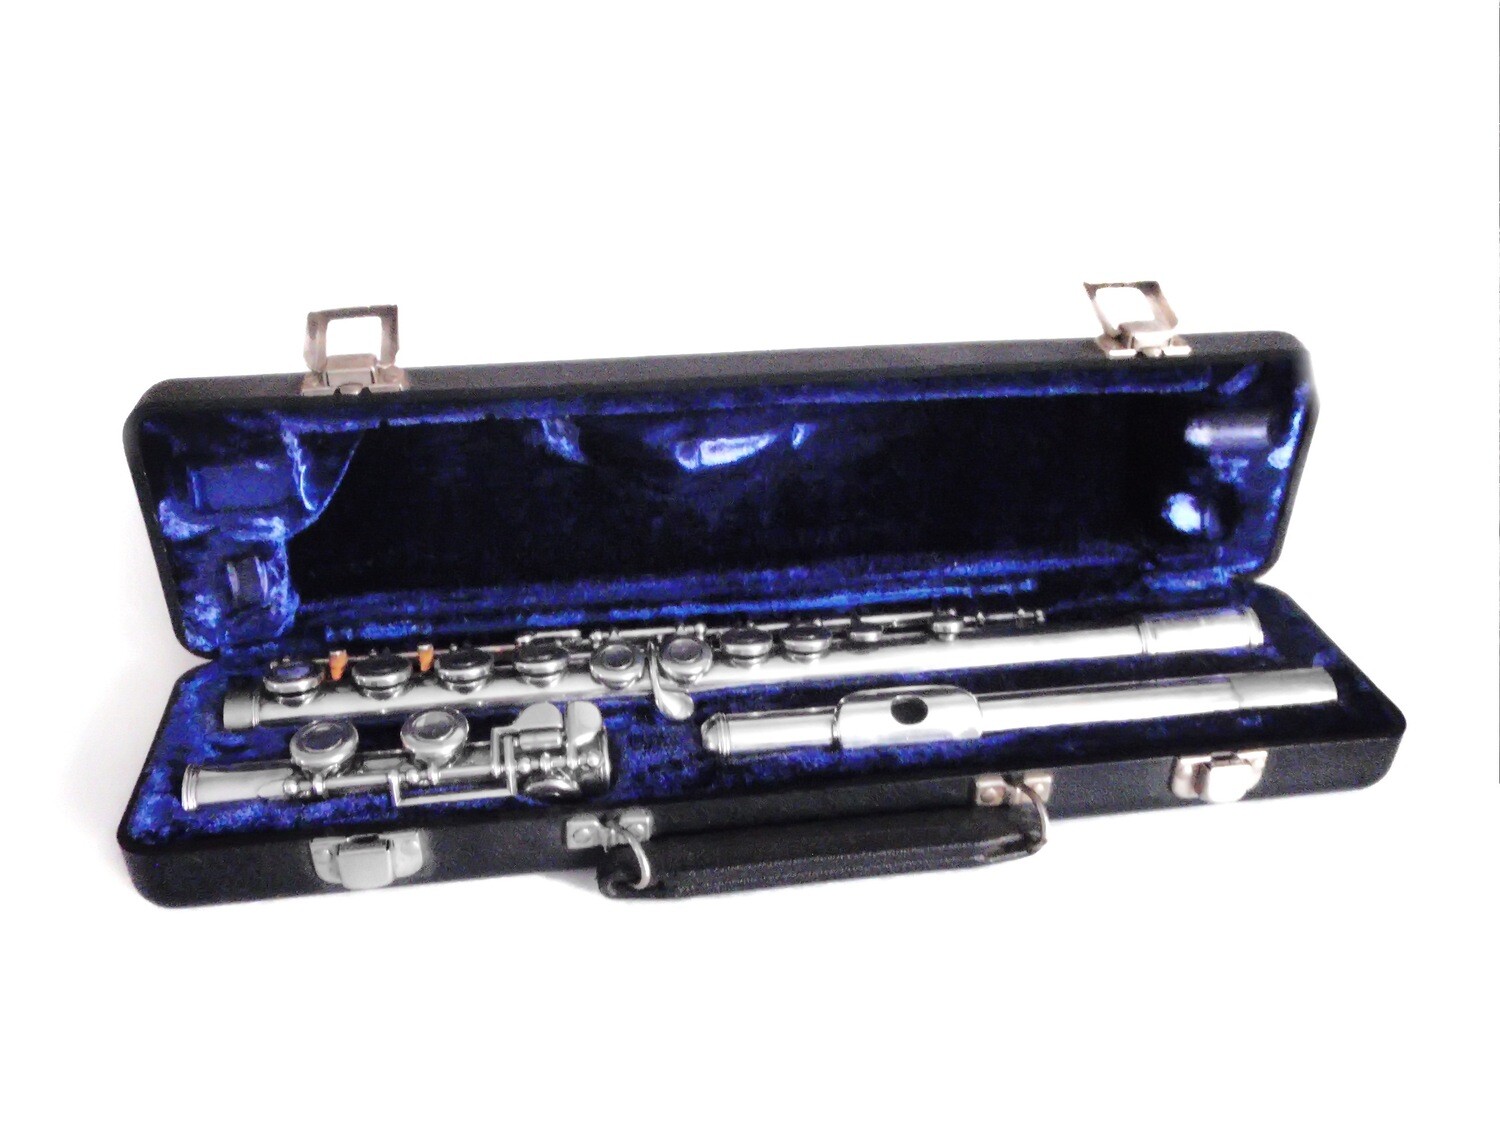 Elkhart Armstrong Silver Plated Flute in Hard Case Never Used 104 Model Flute